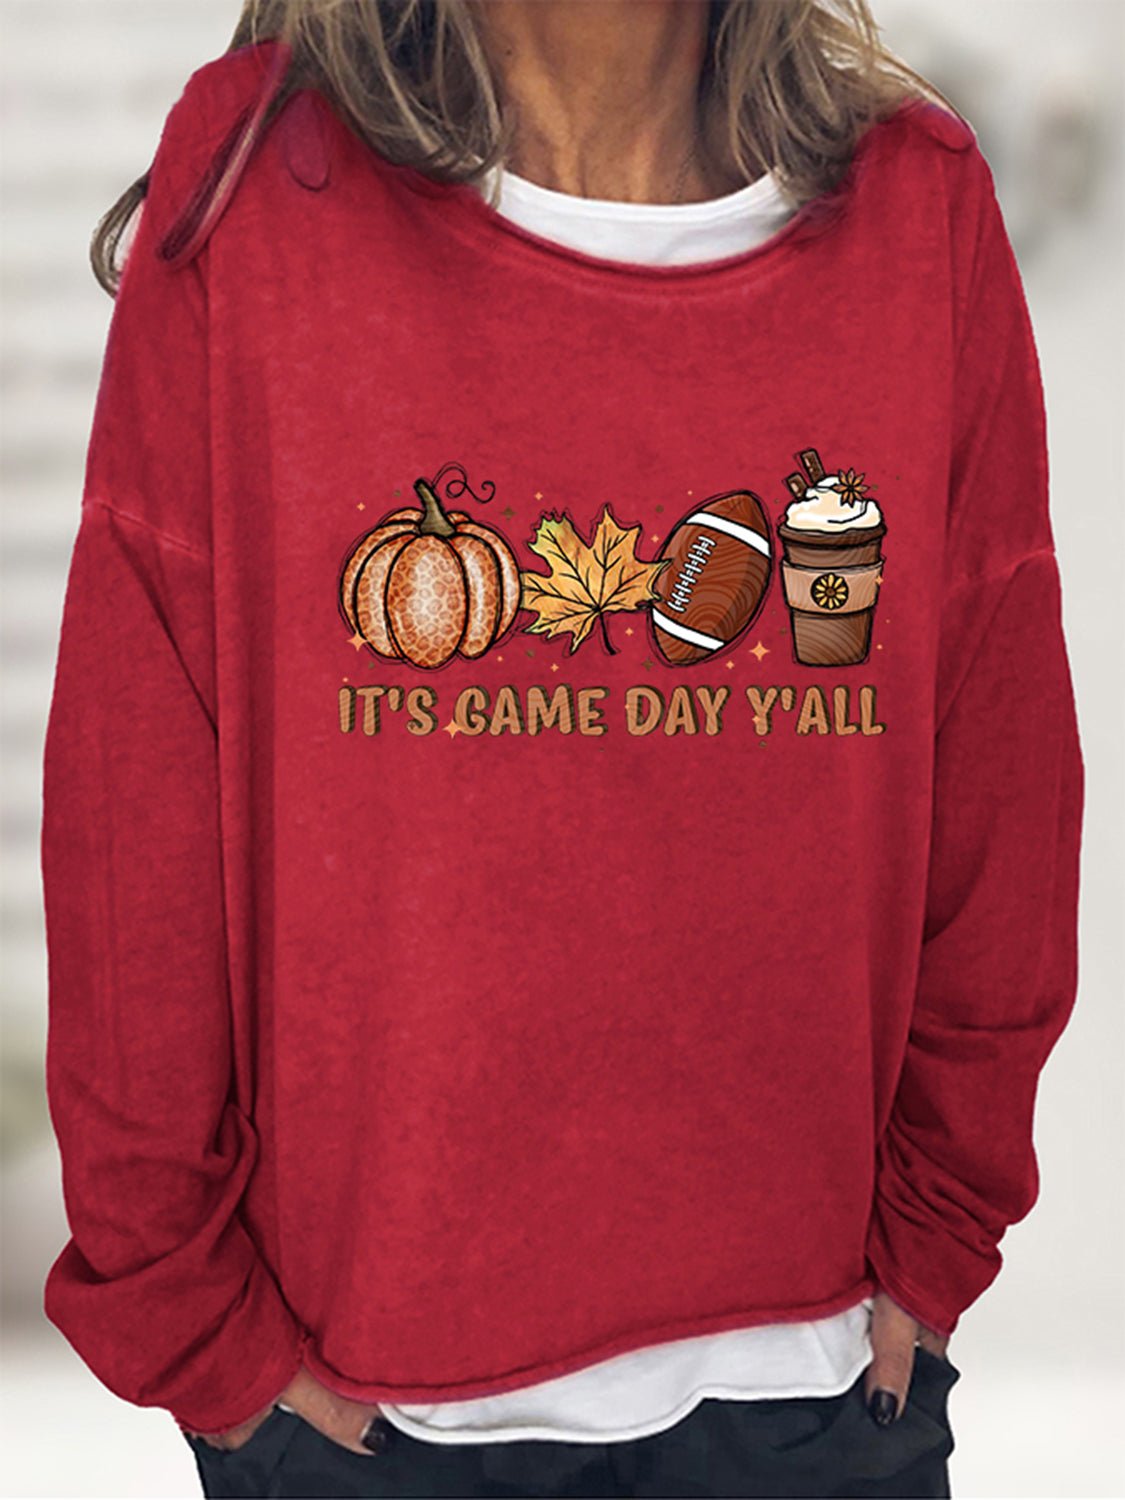 IT'S GAME DAY Y'ALL Graphic Sweatshirt - Global Village Kailua Boutique